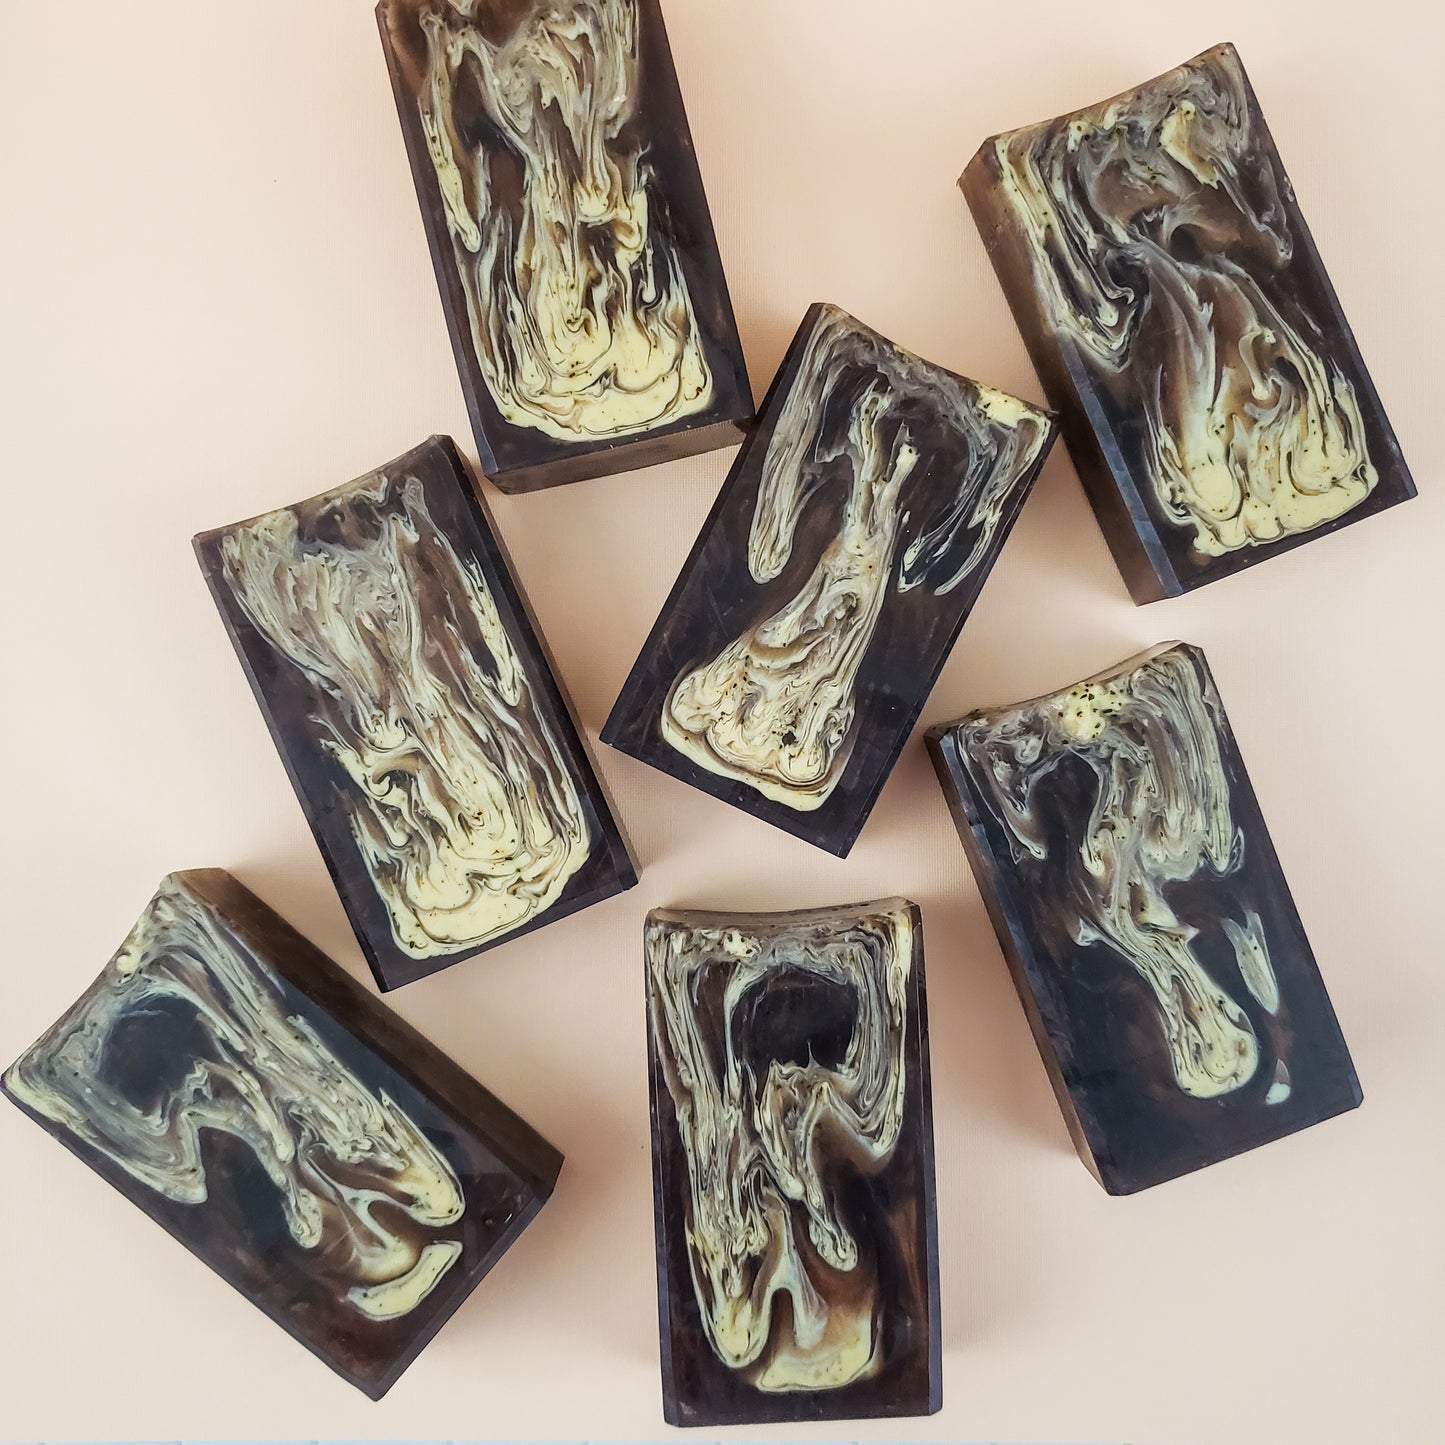 brown bar soaps with light brown swirls on a tan background